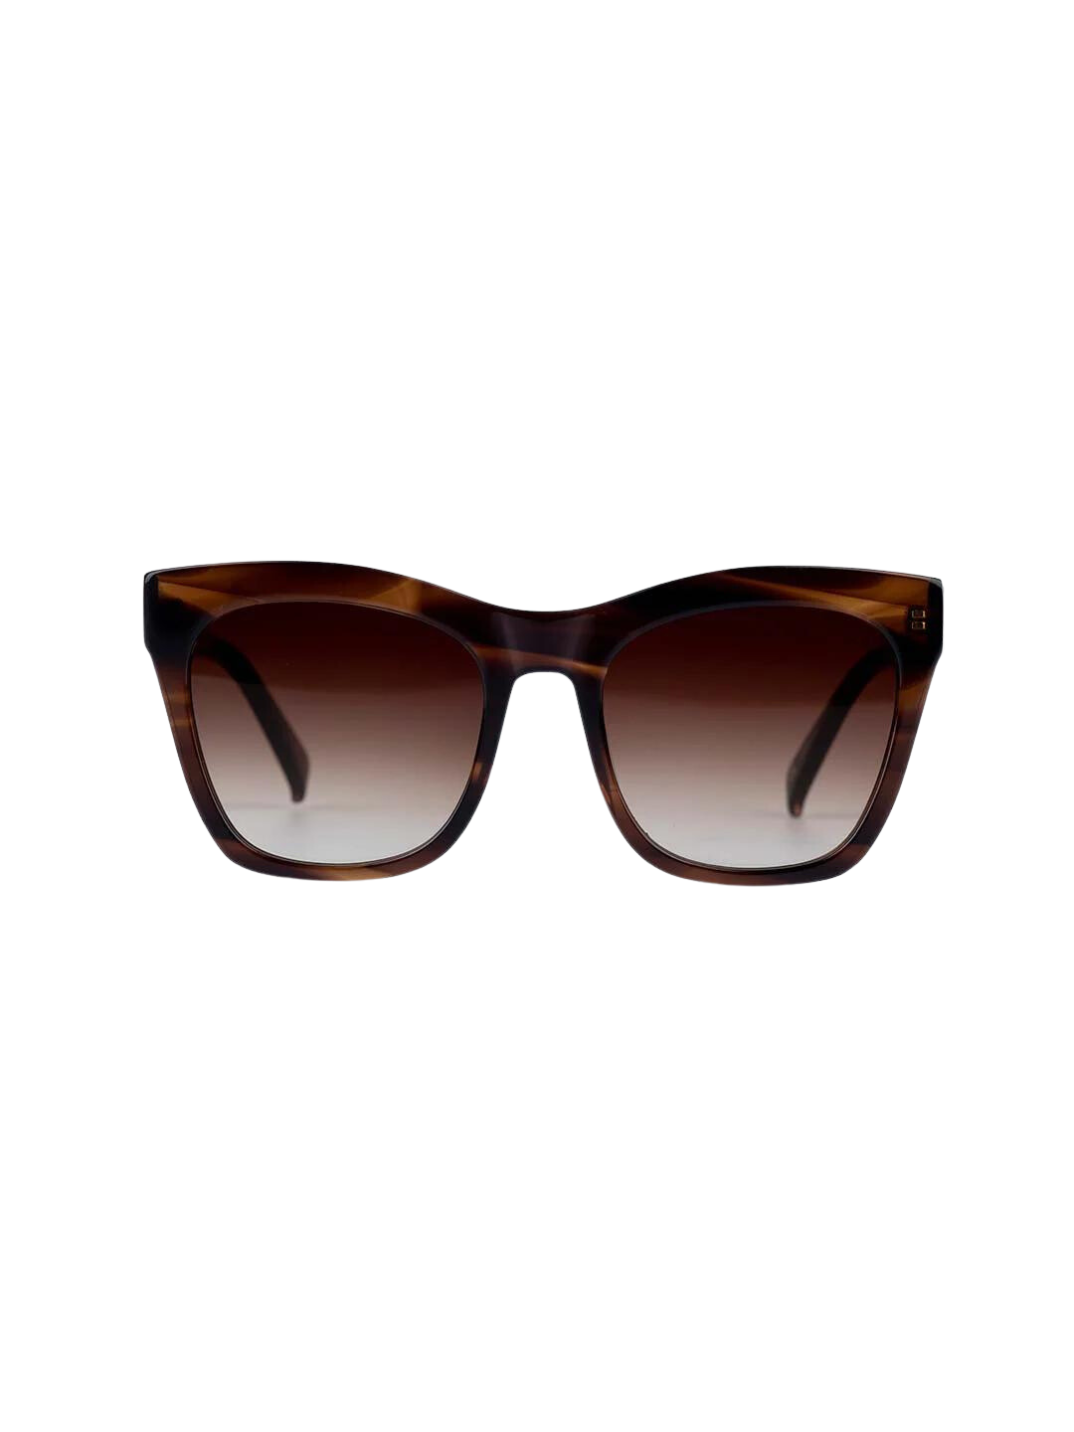 tortoise trendy sunglasses biodegradable frames shop sustainable fashion eco-friendly shop ethically handmade with sustainable materials